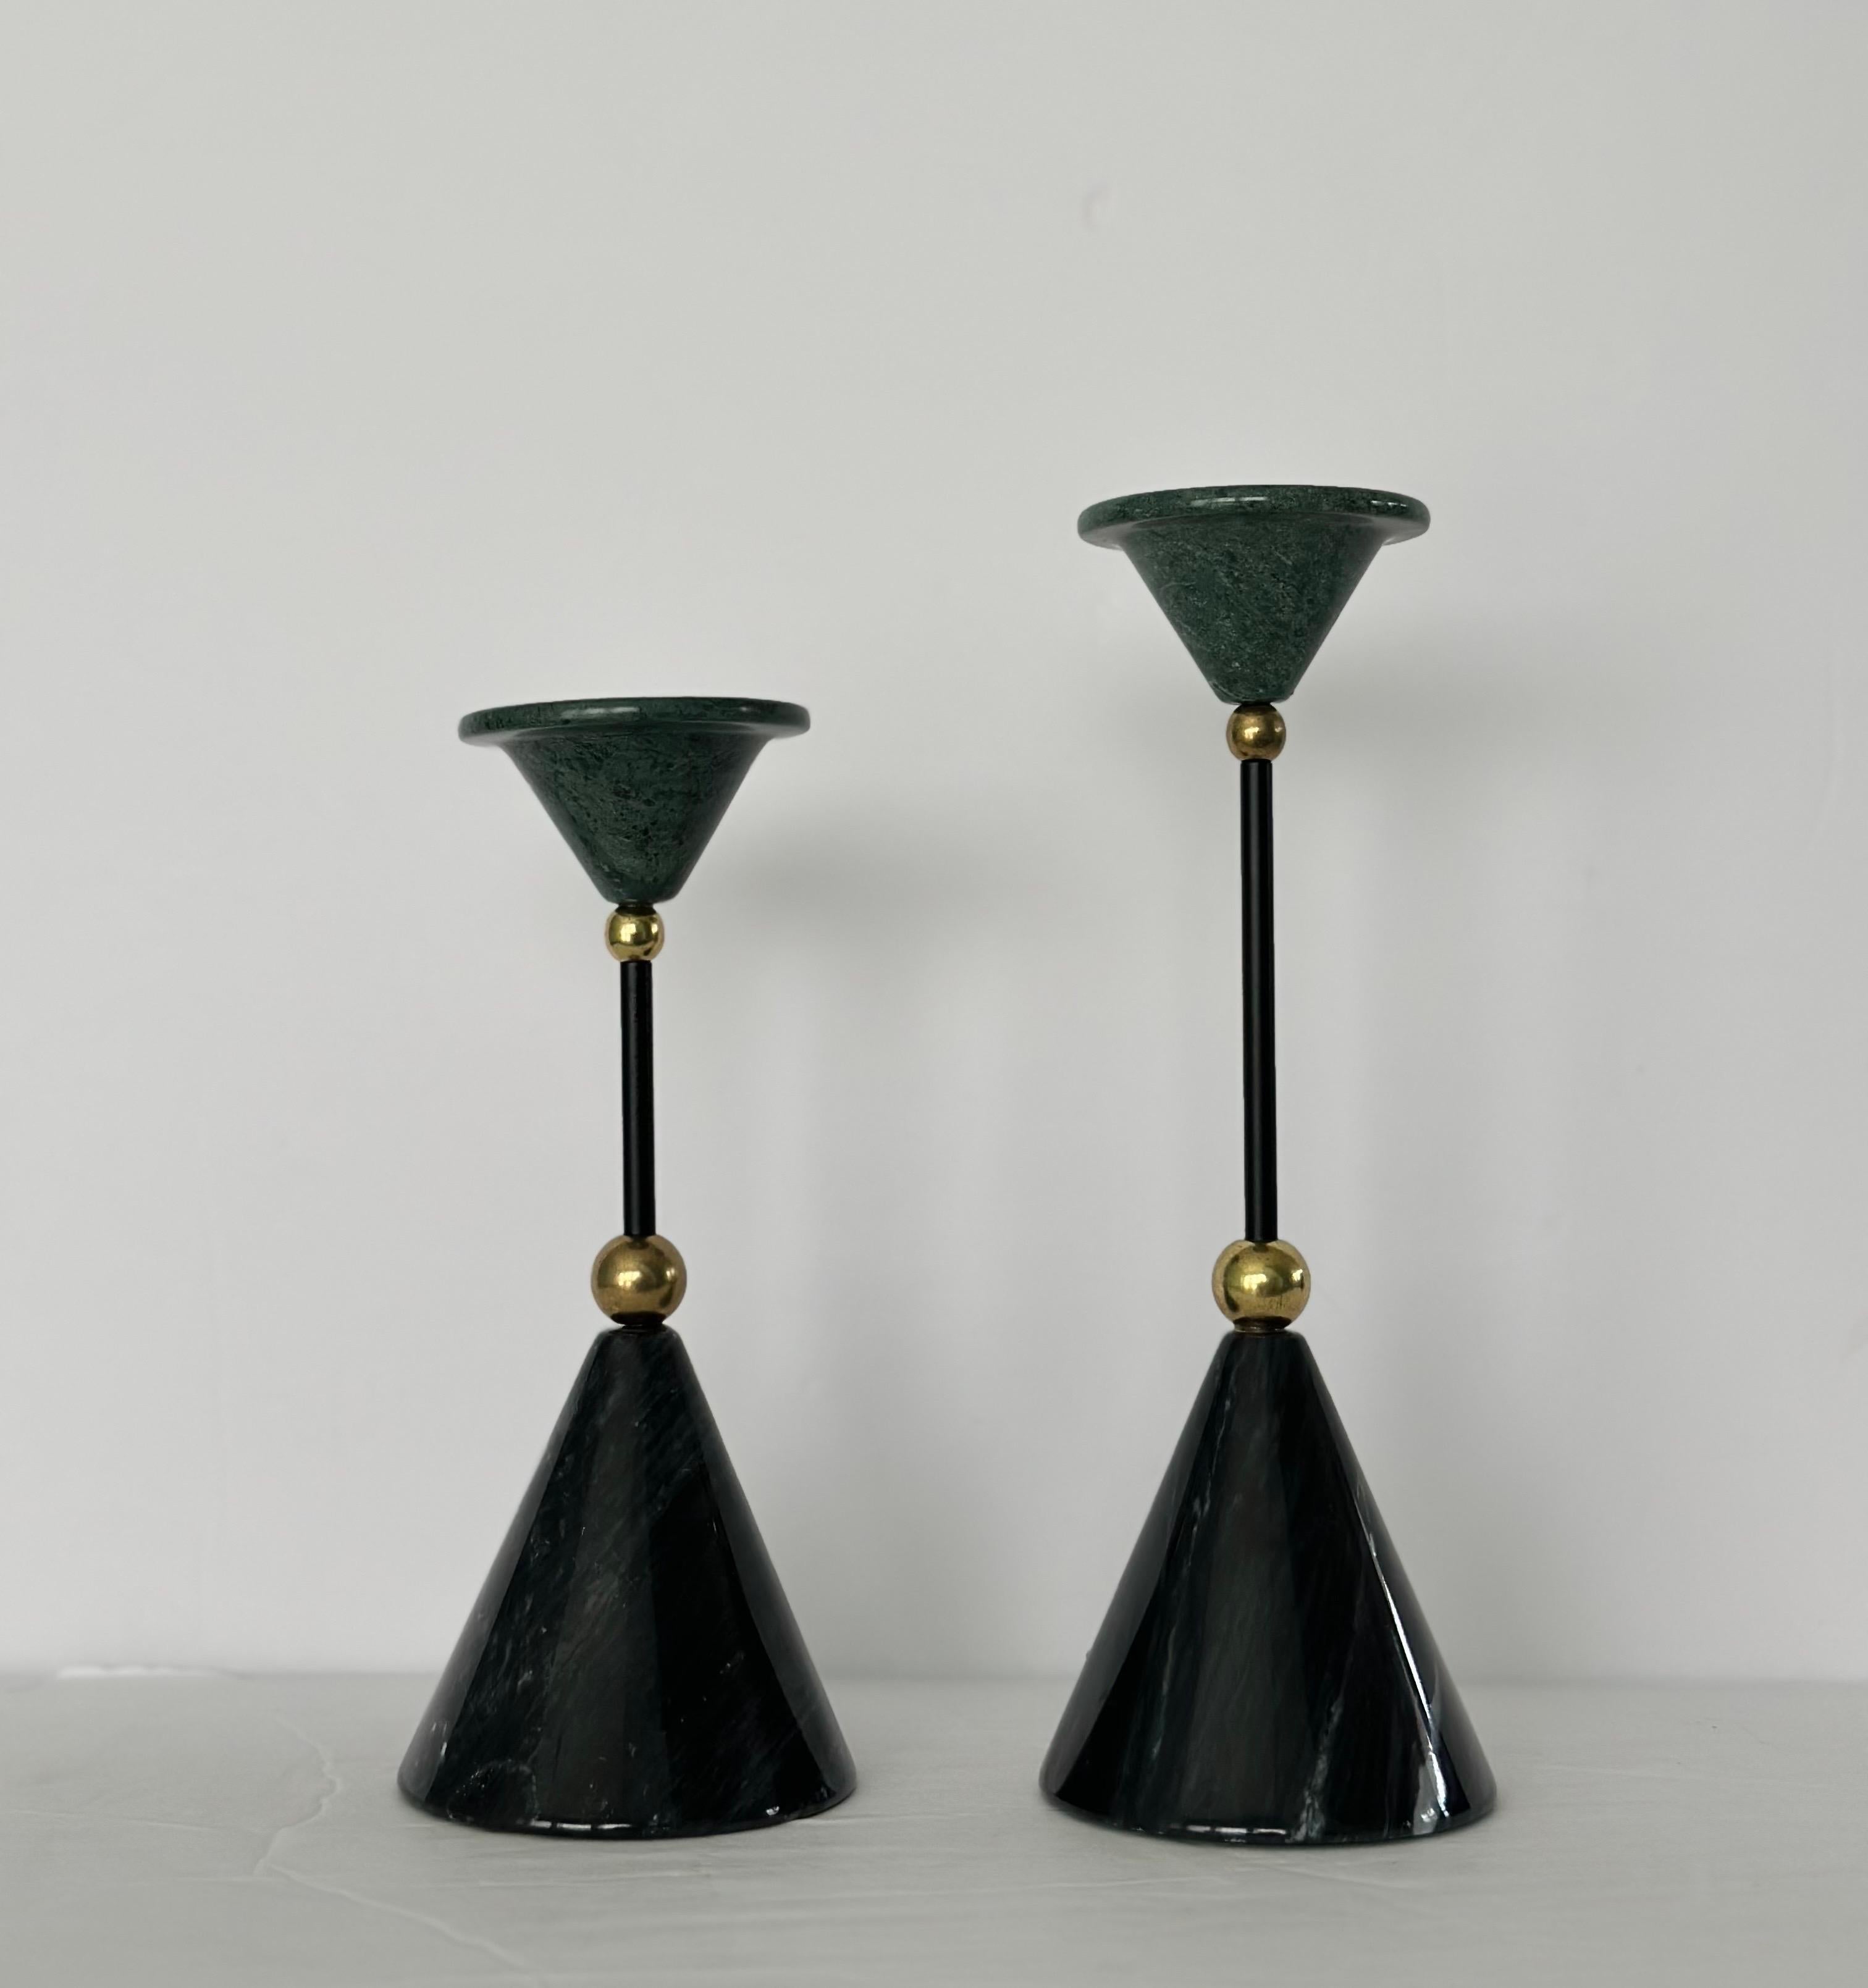 American 1980s Avant-Garde Black and Green Marble Stone Brass Cones Candlesticks - a Pair For Sale